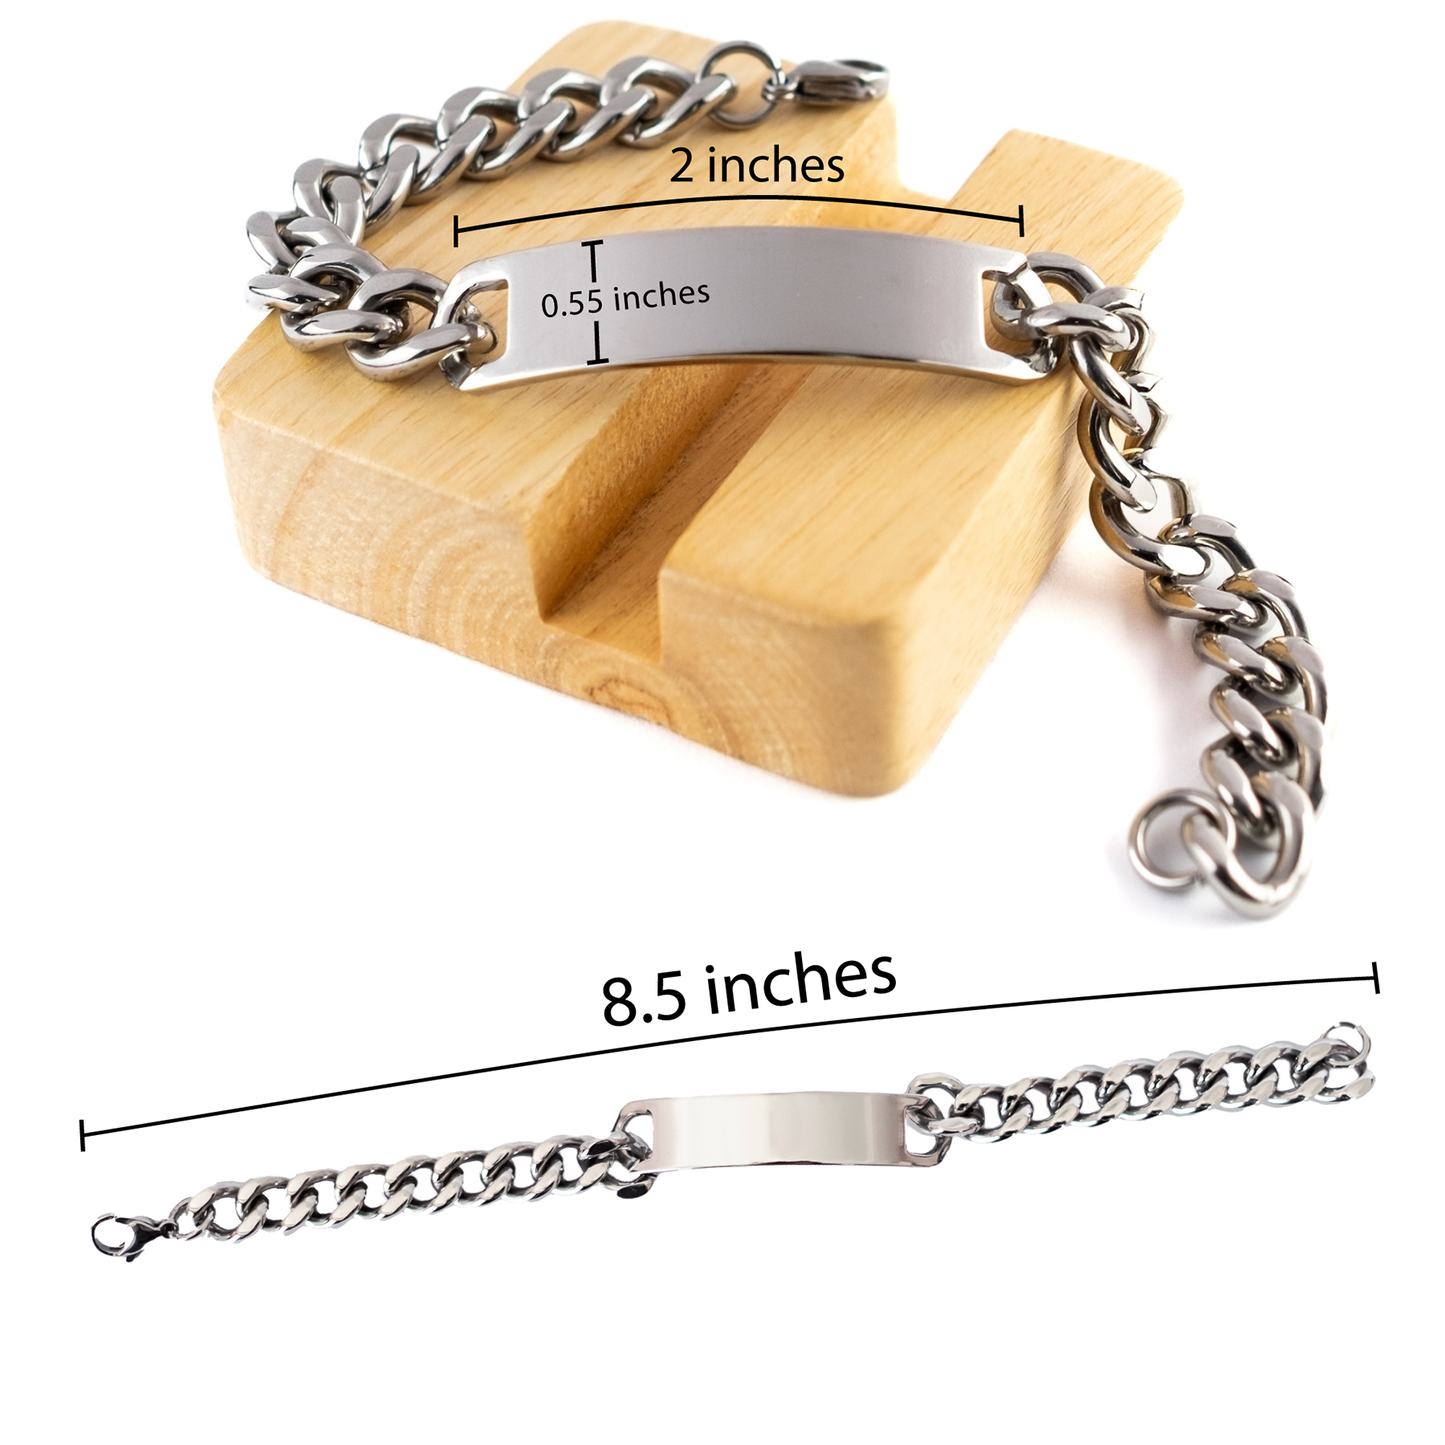 To My Momma Thank You Gifts, You are appreciated more than you know, Appreciation Cuban Chain Stainless Steel Bracelet for Momma, Birthday Unique Gifts for Momma